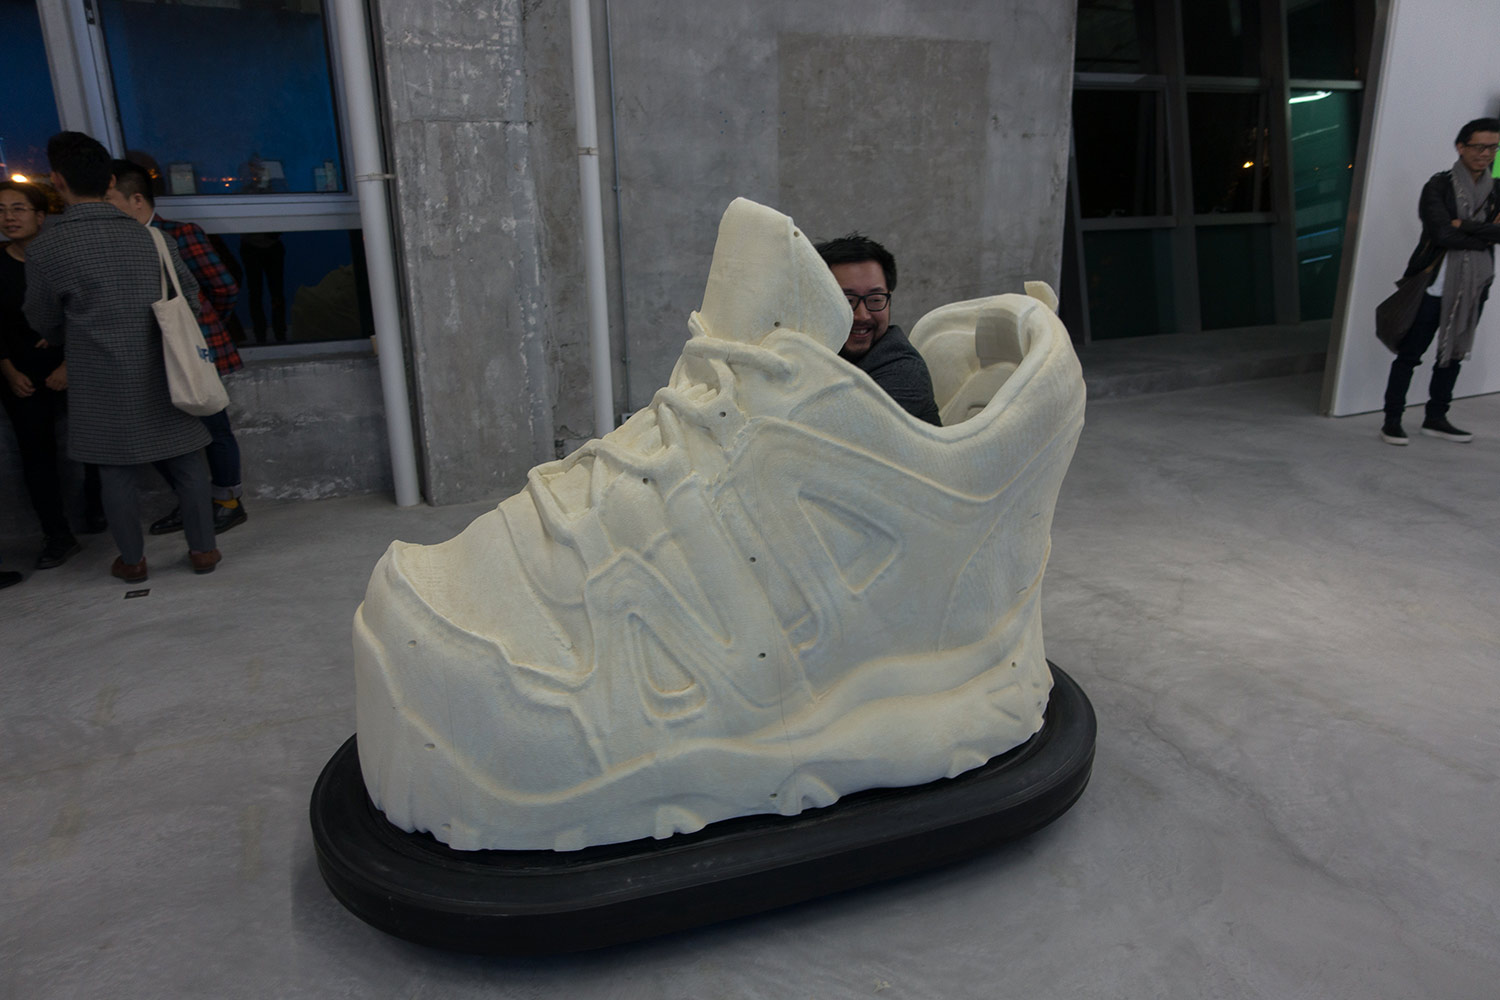 3D printed shoe and bumper car being ridden